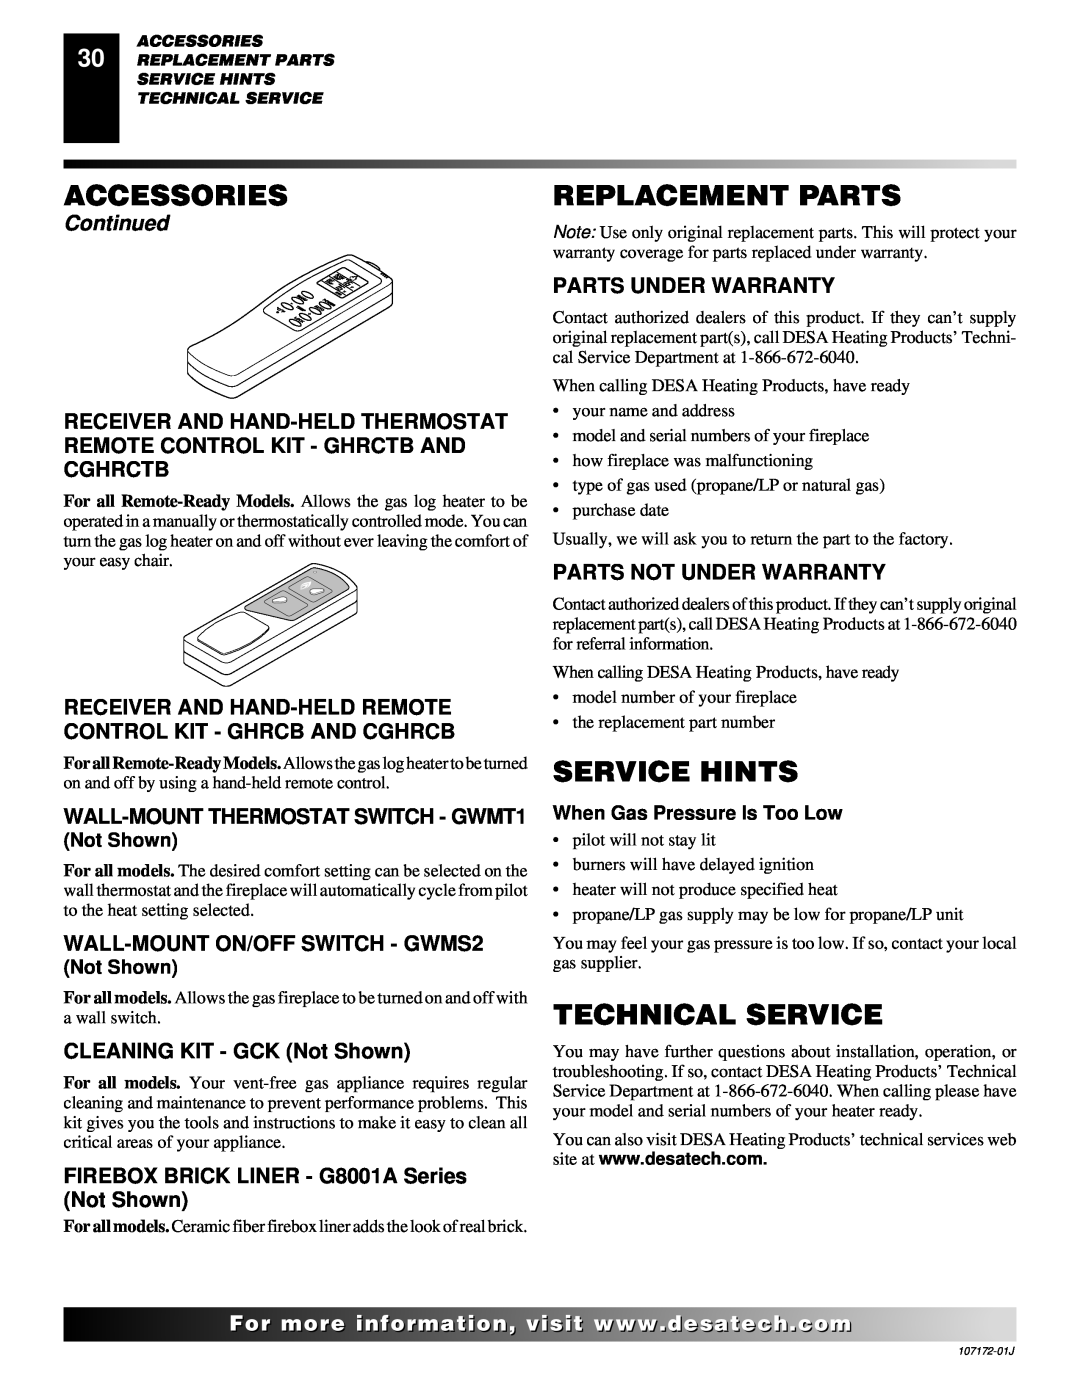 Desa EFS33PRA Replacement Parts, Service Hints, Technical Service, WALL-MOUNTTHERMOSTAT SWITCH - GWMT1, Accessories 